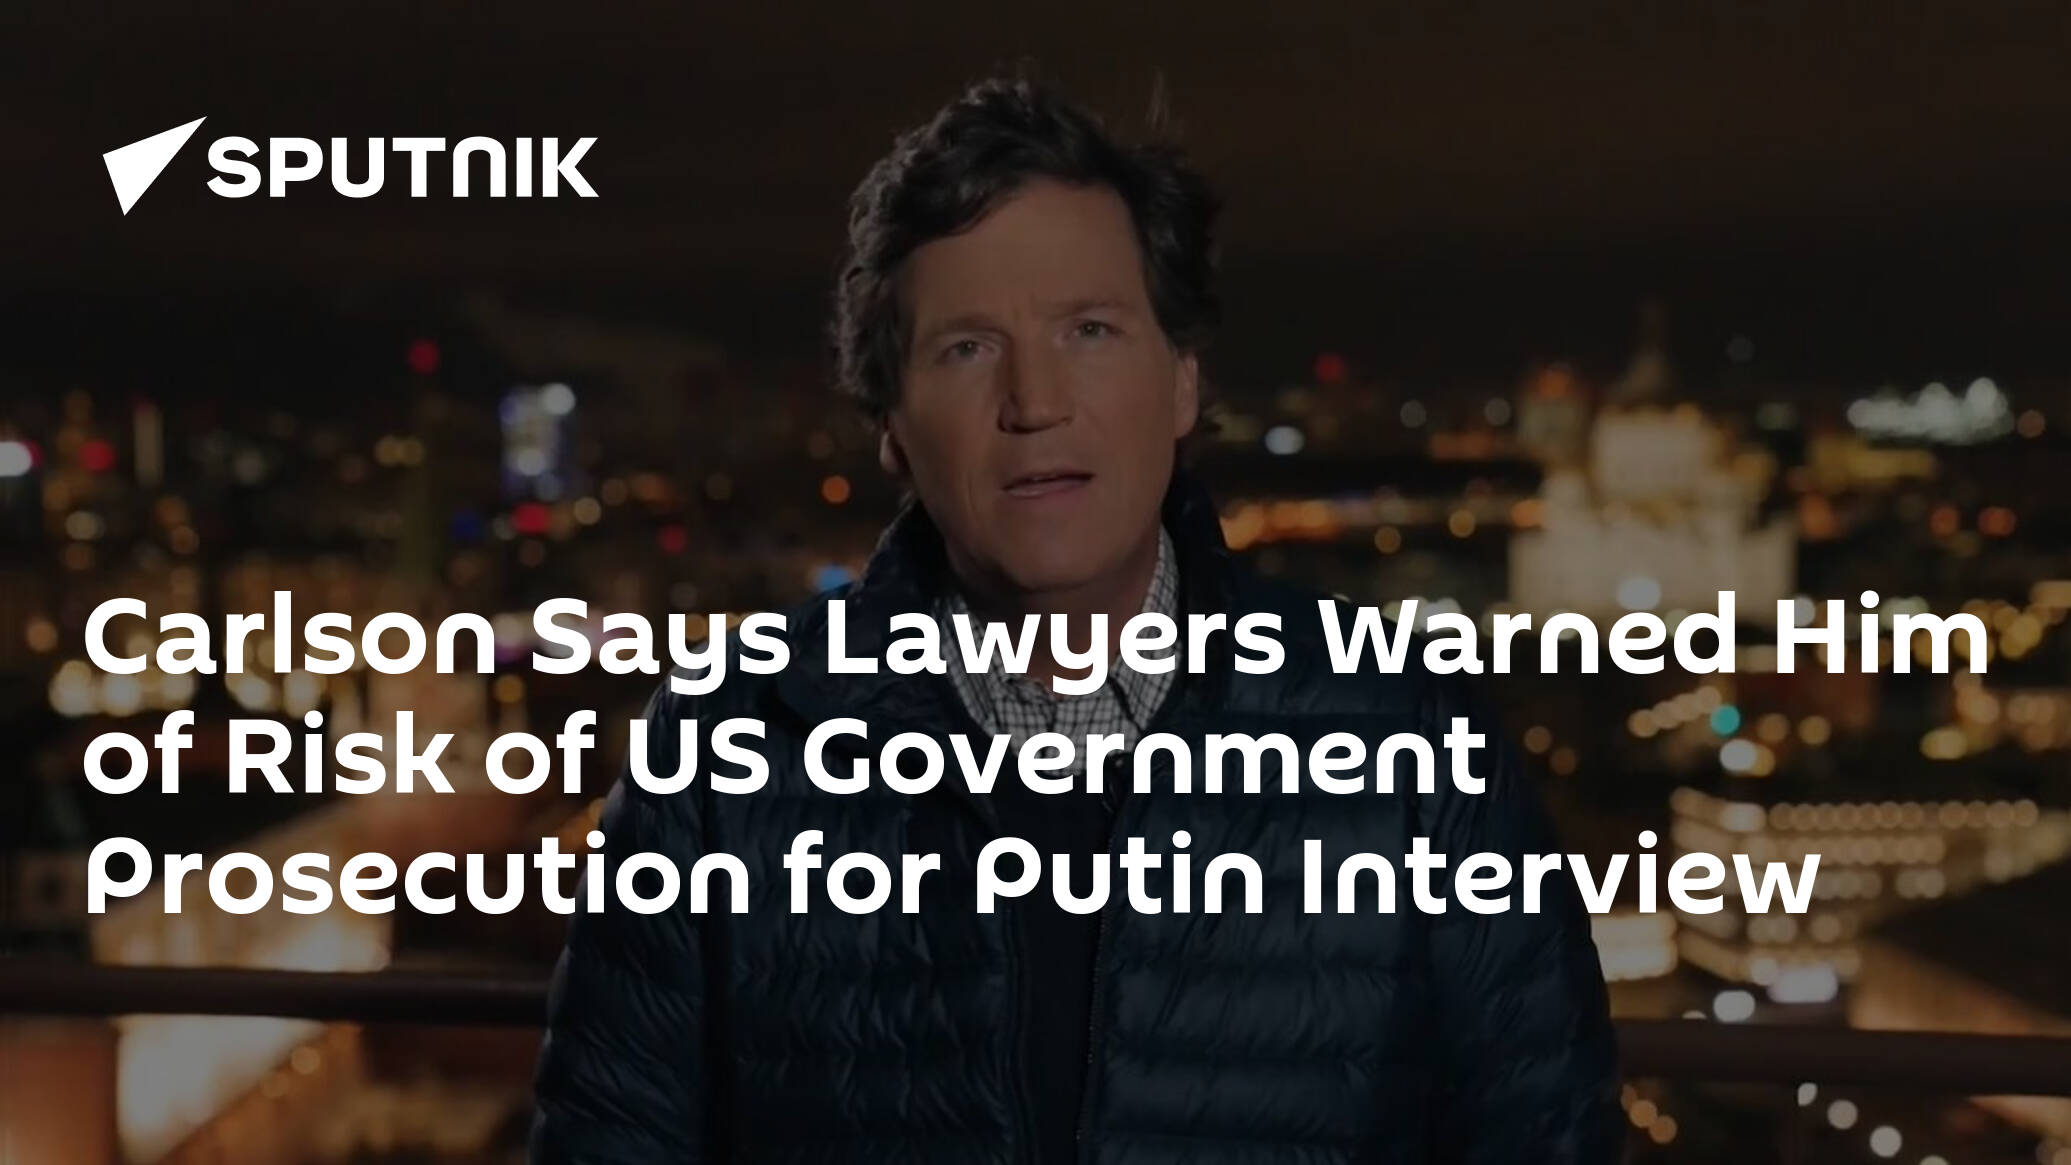 Carlson Says Lawyers Warned Him of Risk of US Government Prosecution for Putin Interview